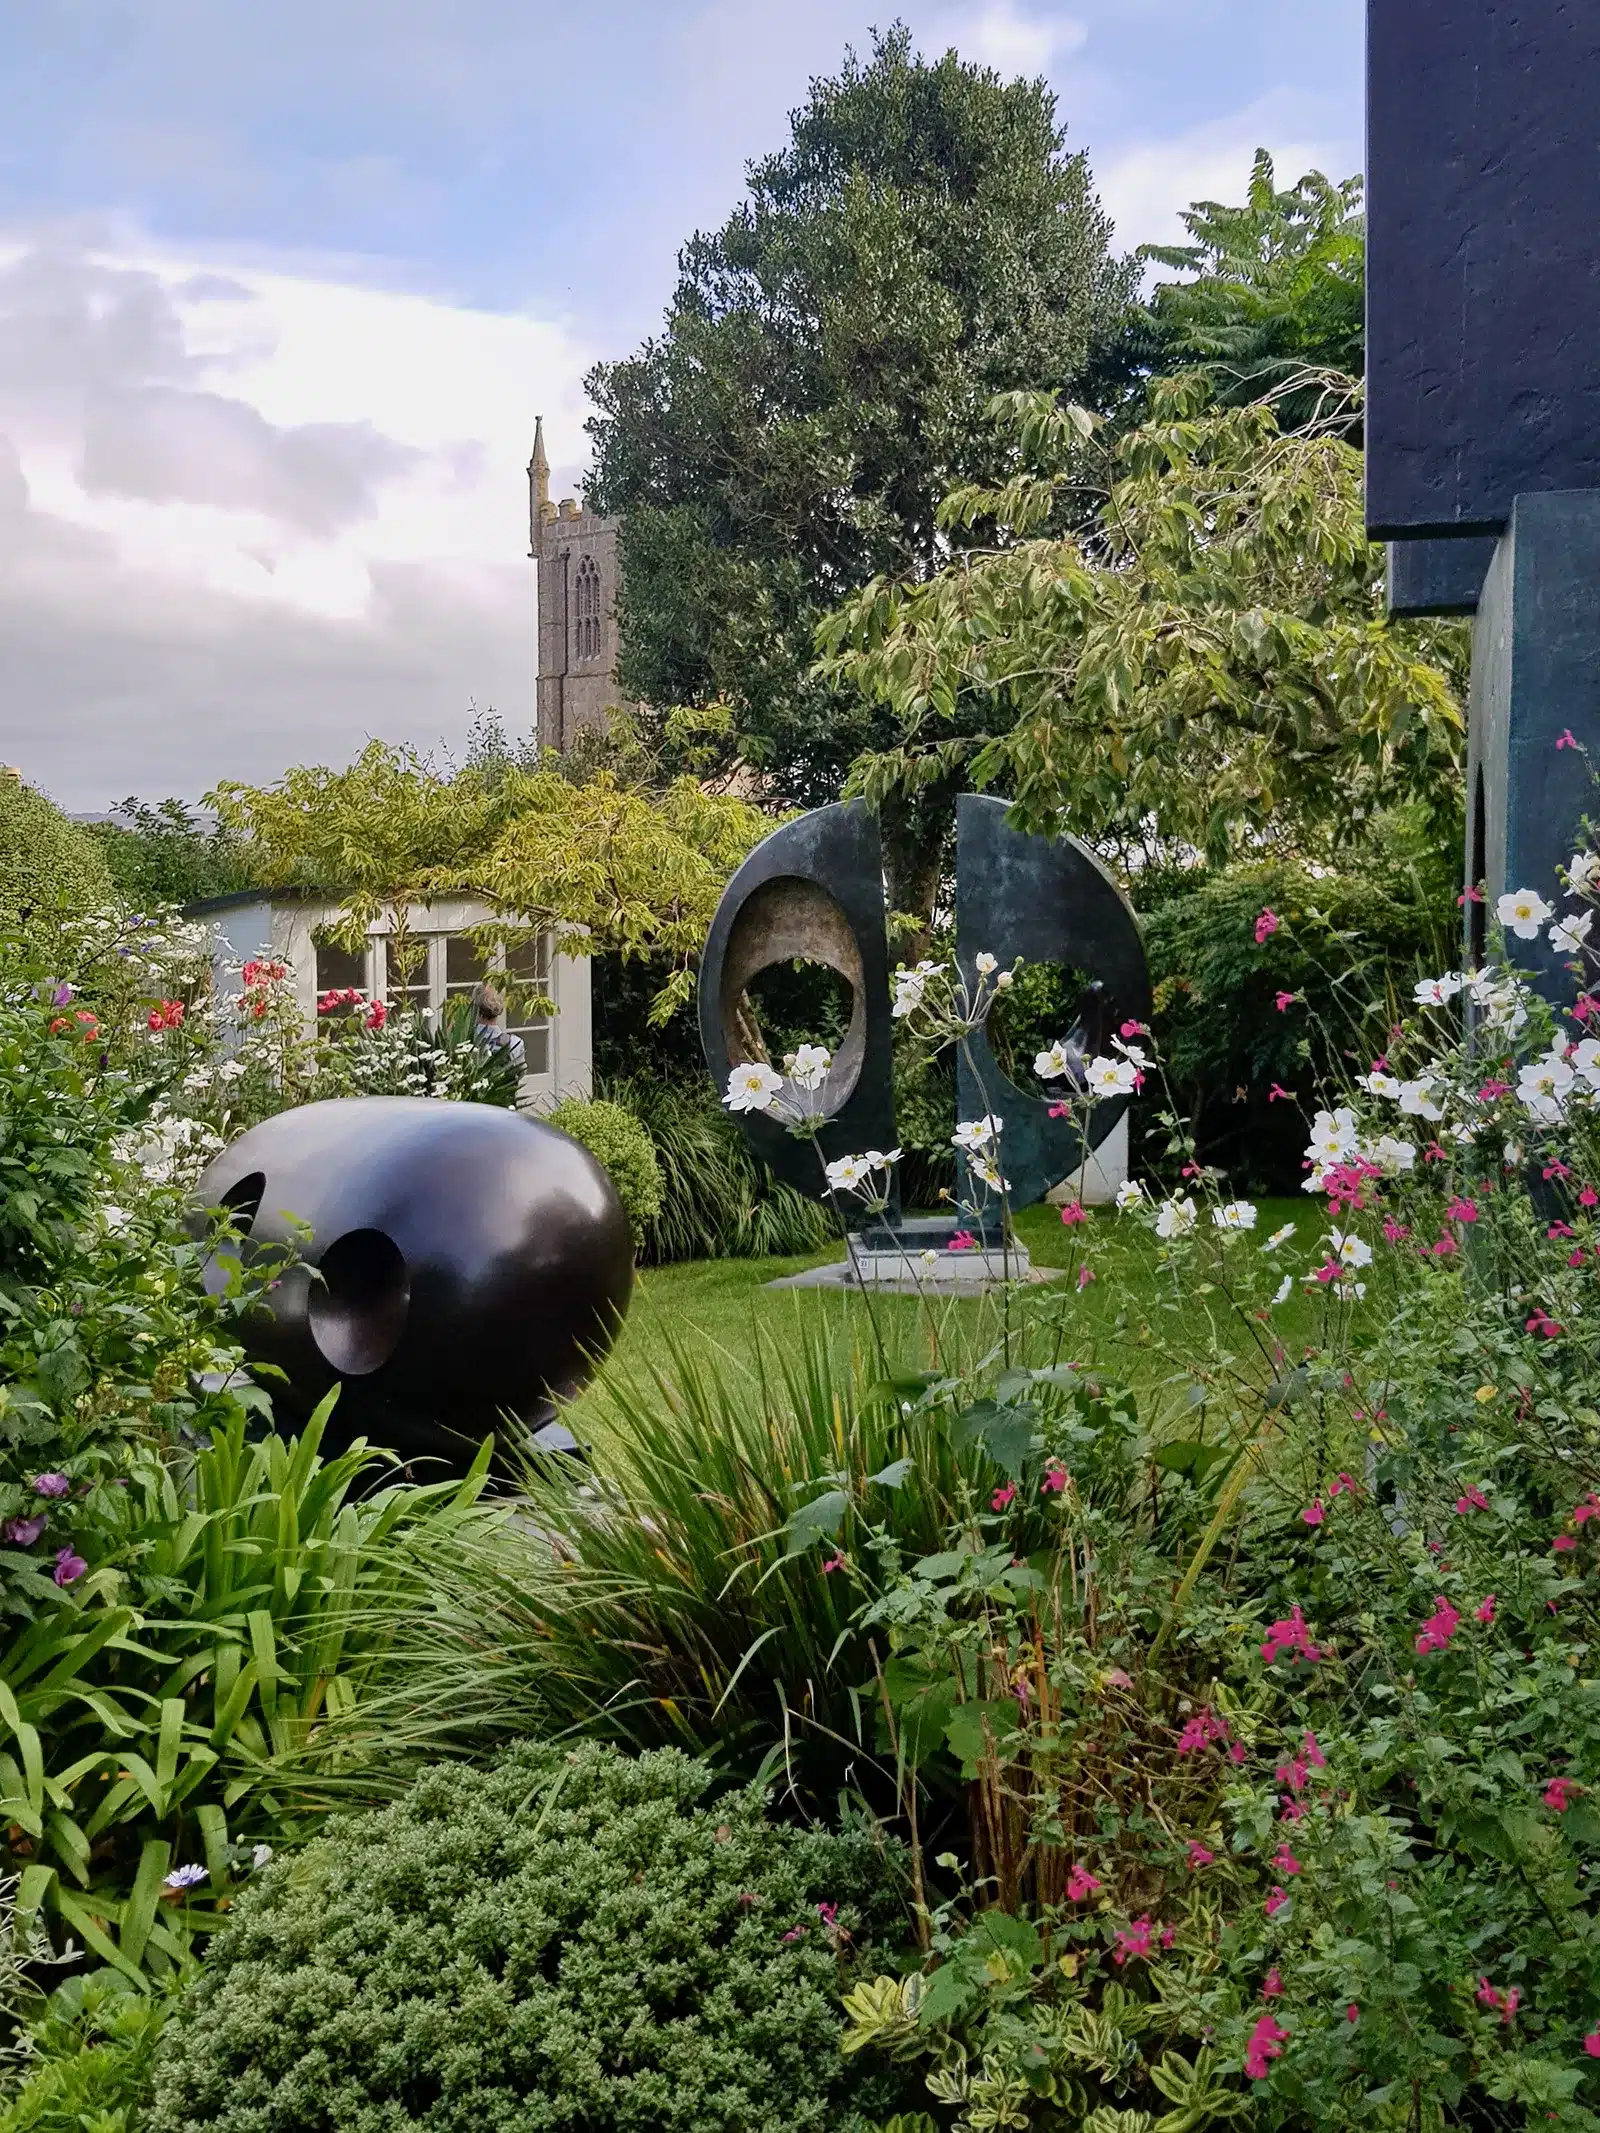 A garden with a large sculpture in the middle of it.